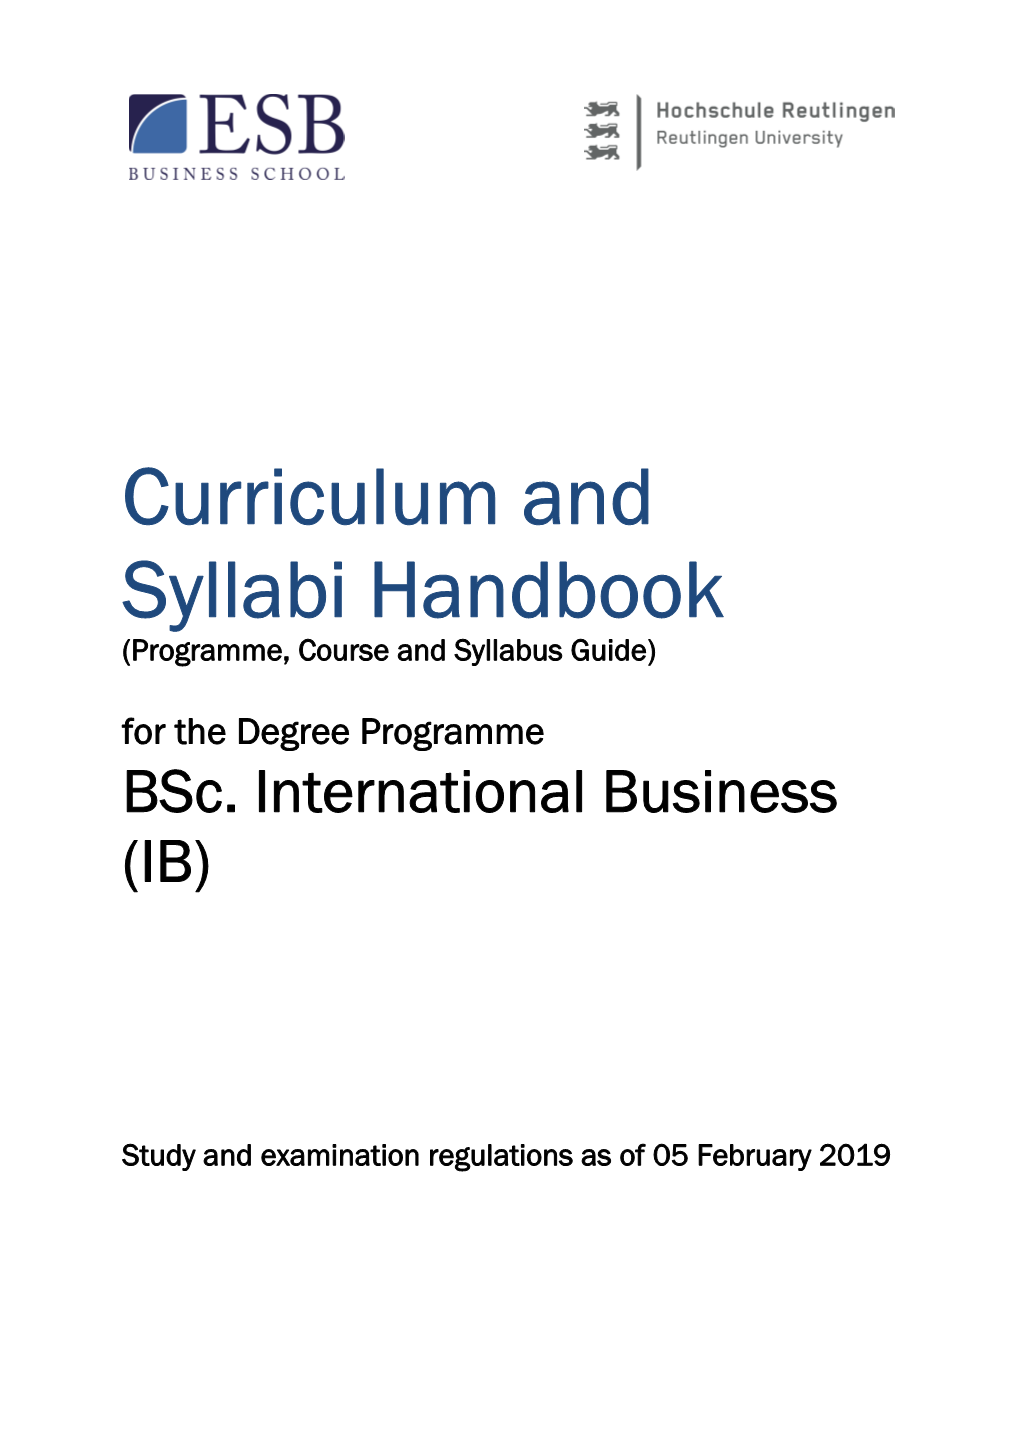 Curriculum and Syllabi Handbook (Programme, Course and Syllabus Guide) for the Degree Programme Bsc